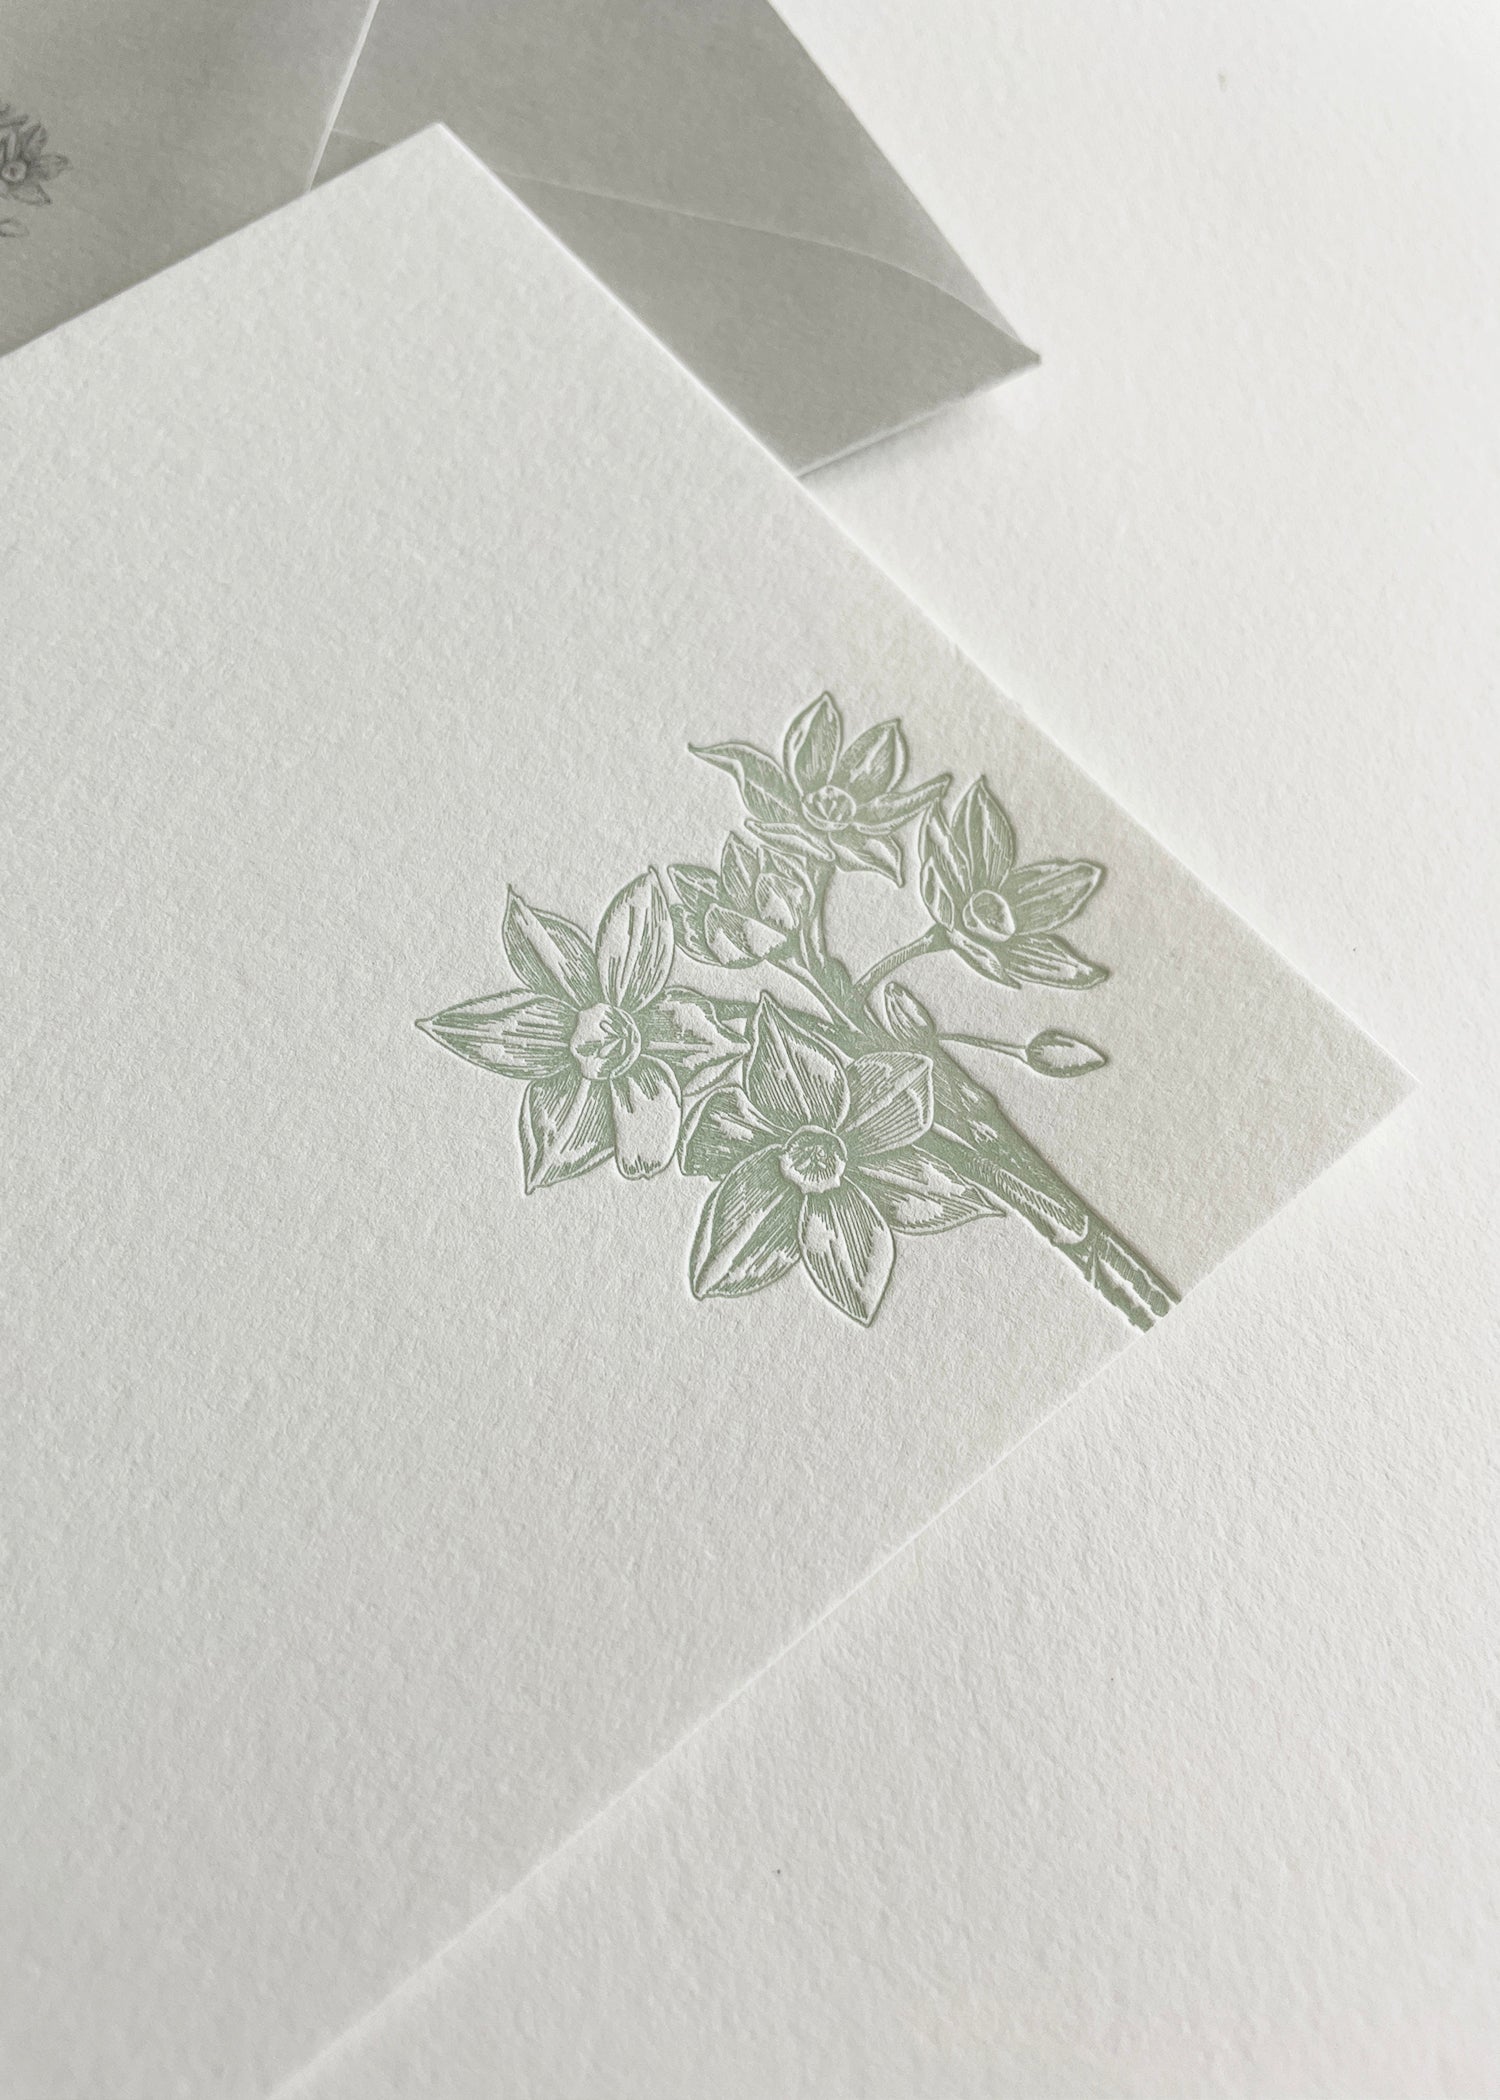 Letterpress flat note card with a green paperwhite by Rust Belt Love